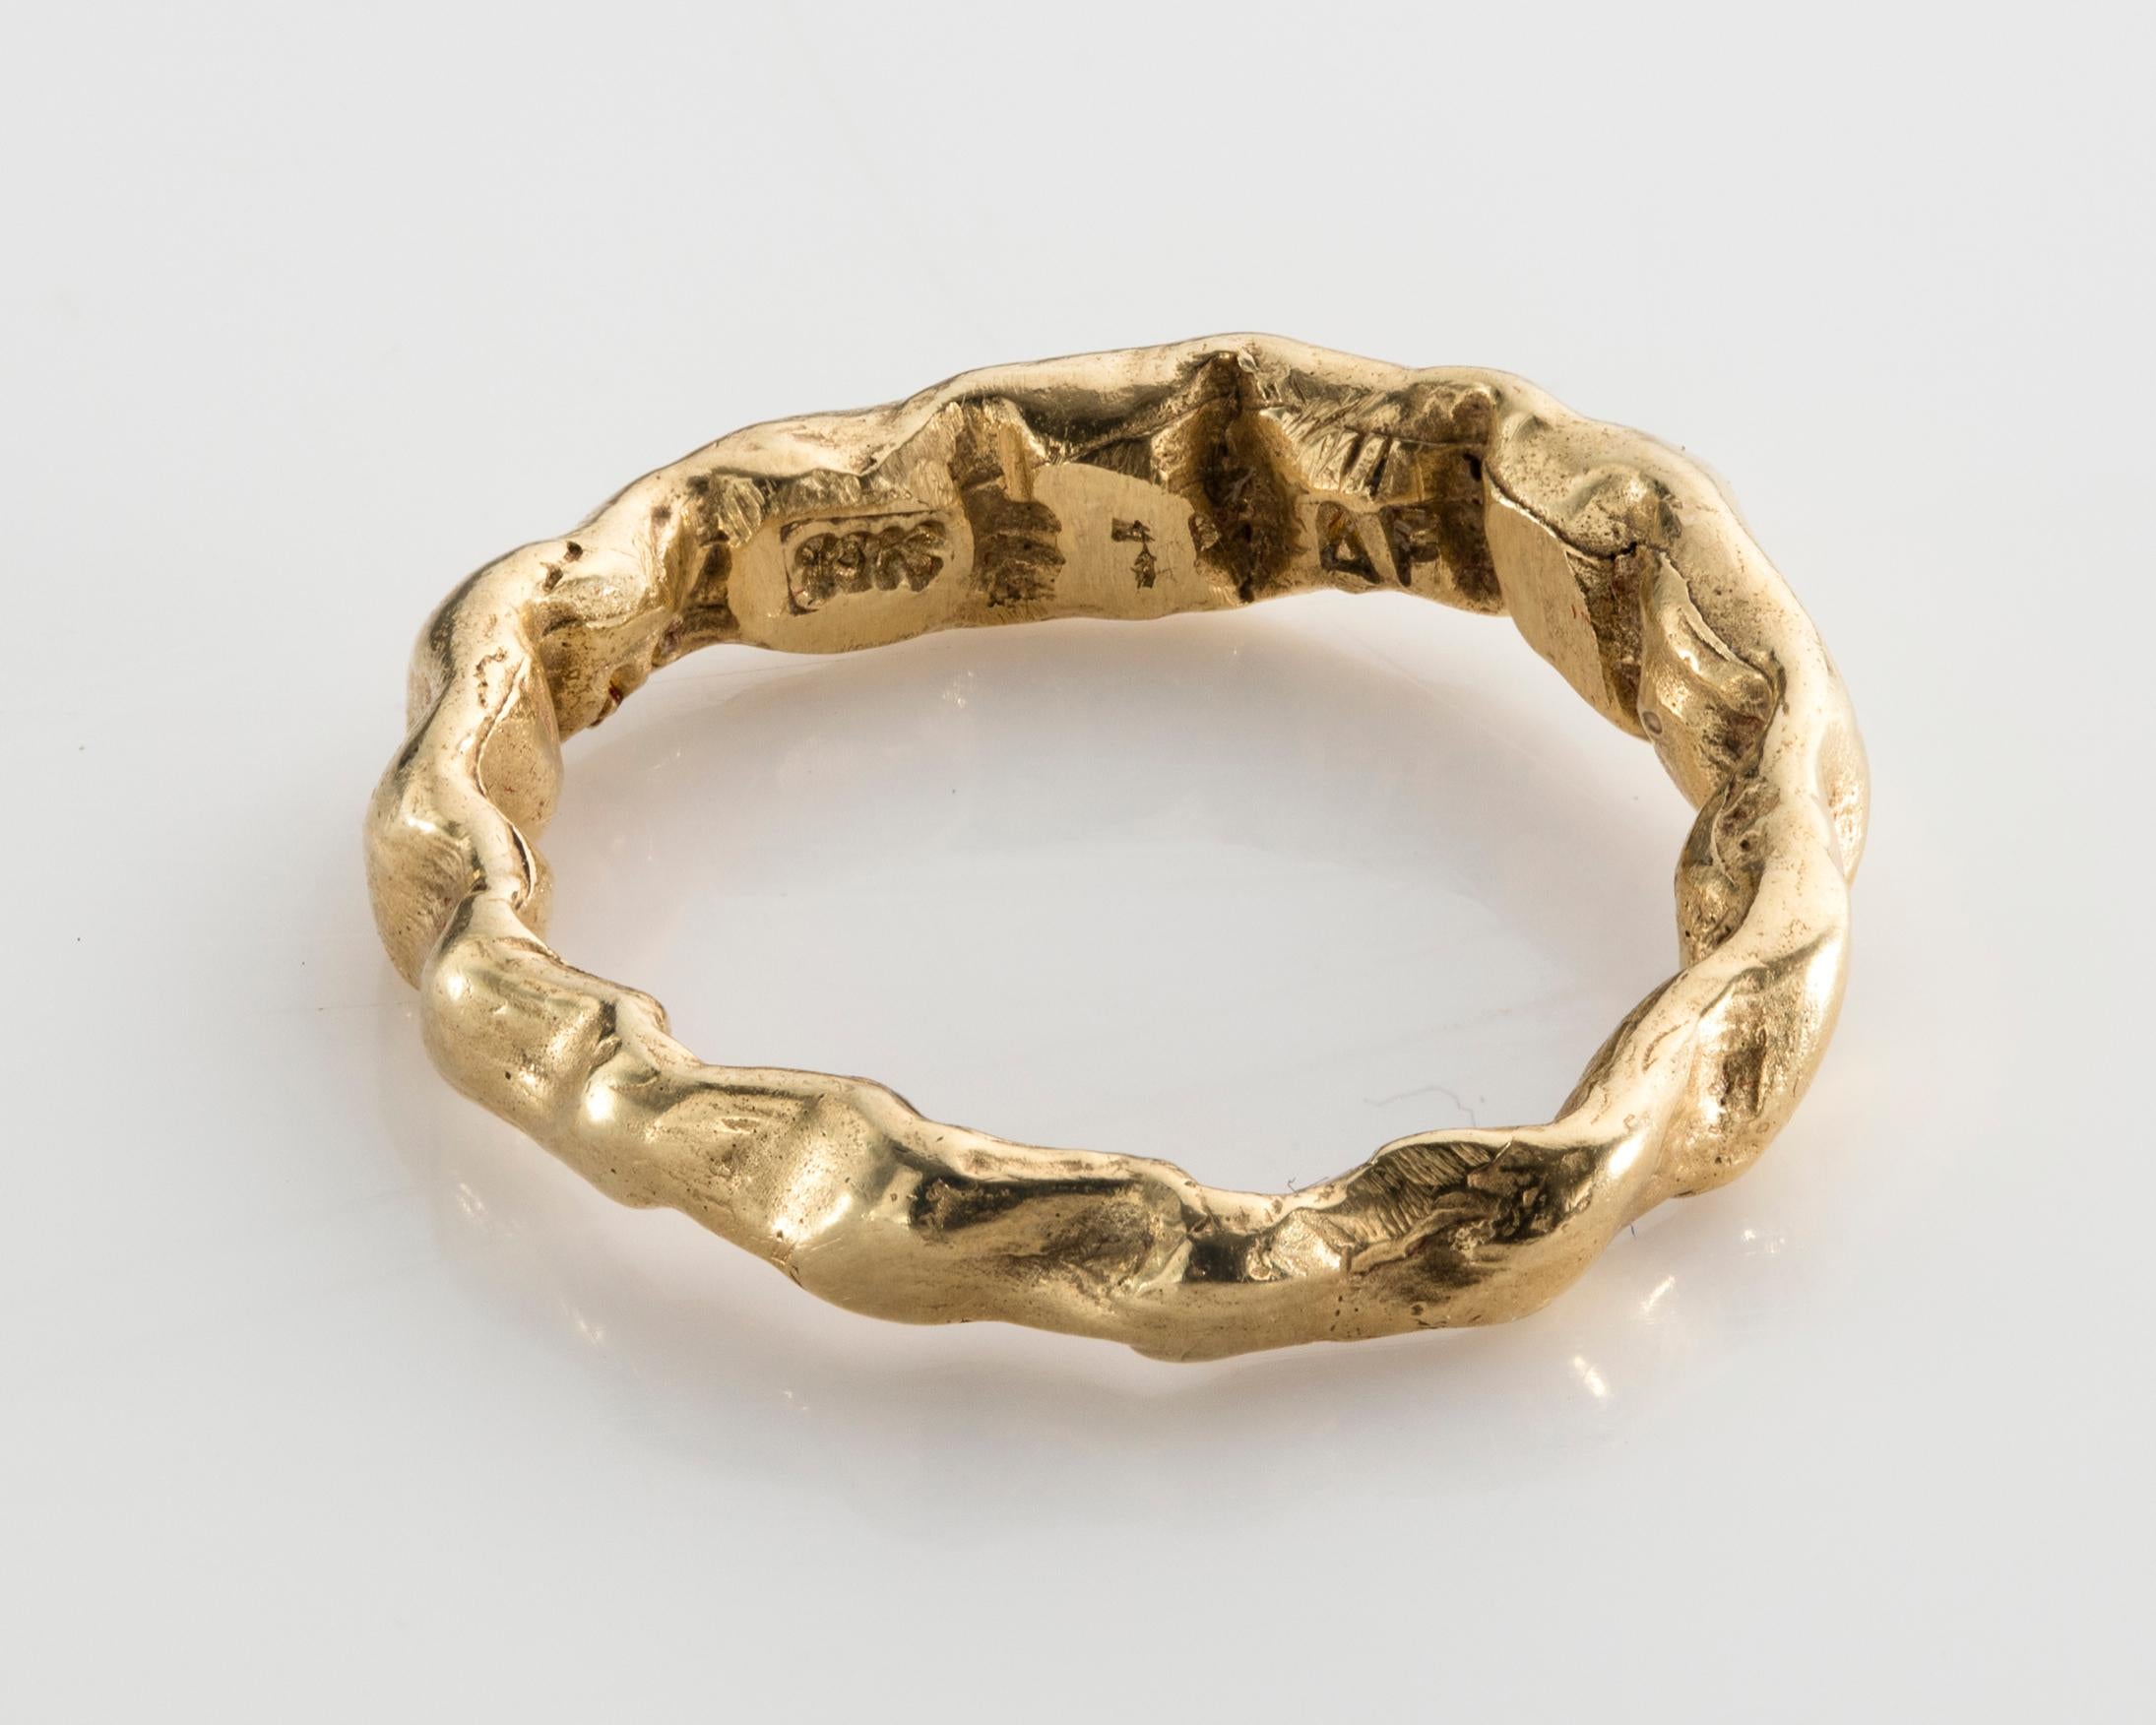 Baroque 7 ring in 18-karat gold in size 4-1/2. Designed and made by Anne Fischer, 2013.
 